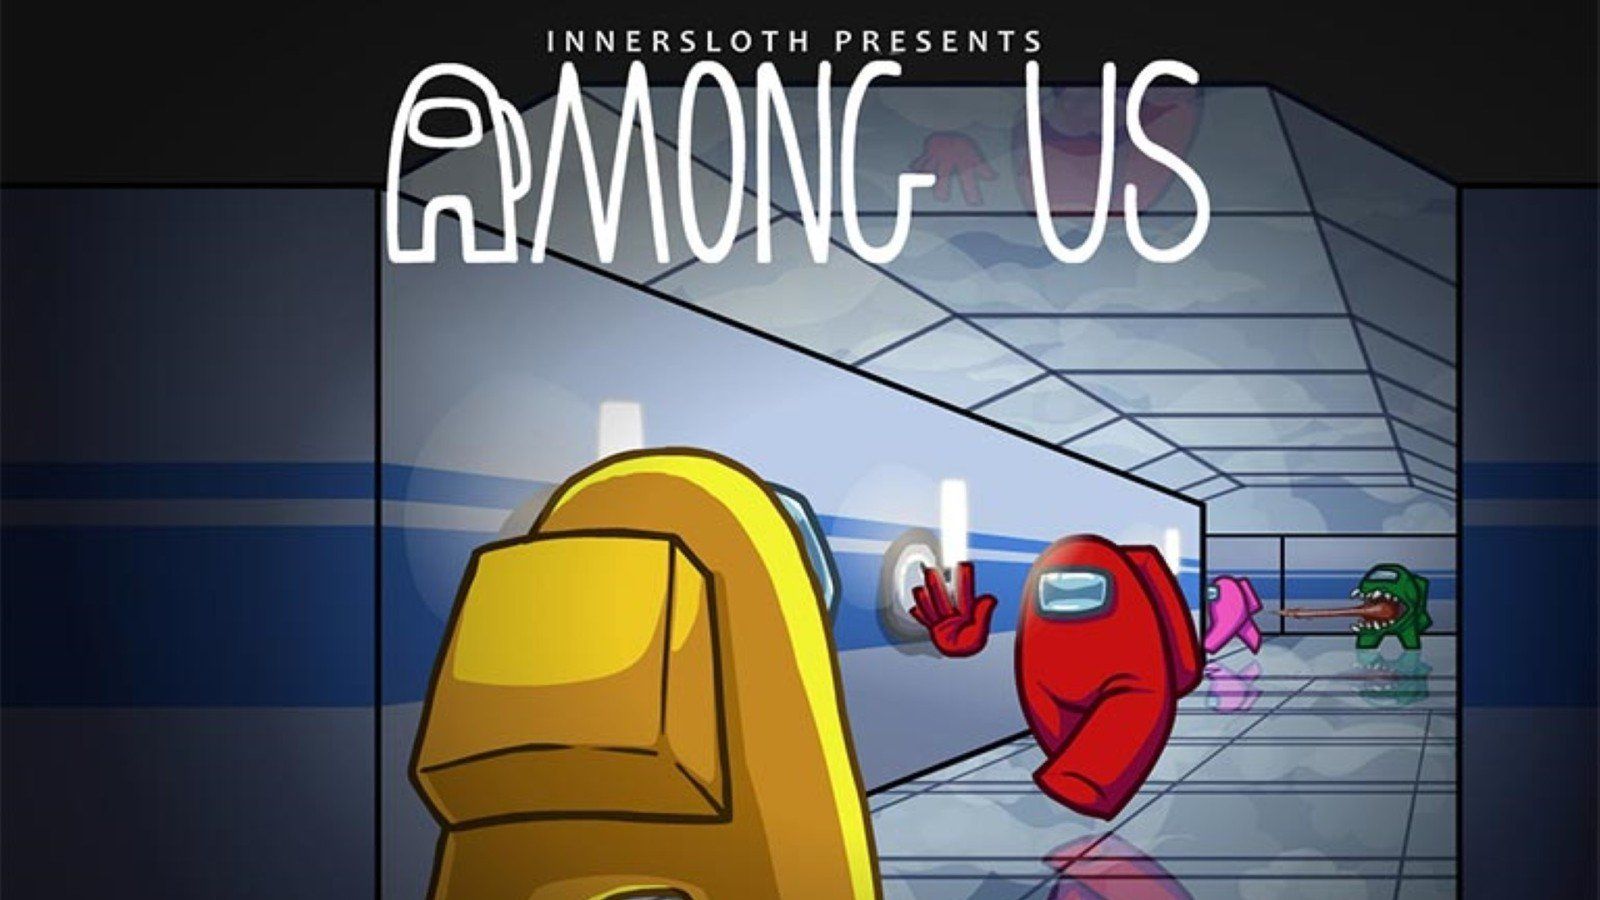 What is the difference between the paid and free versions of Among Us?